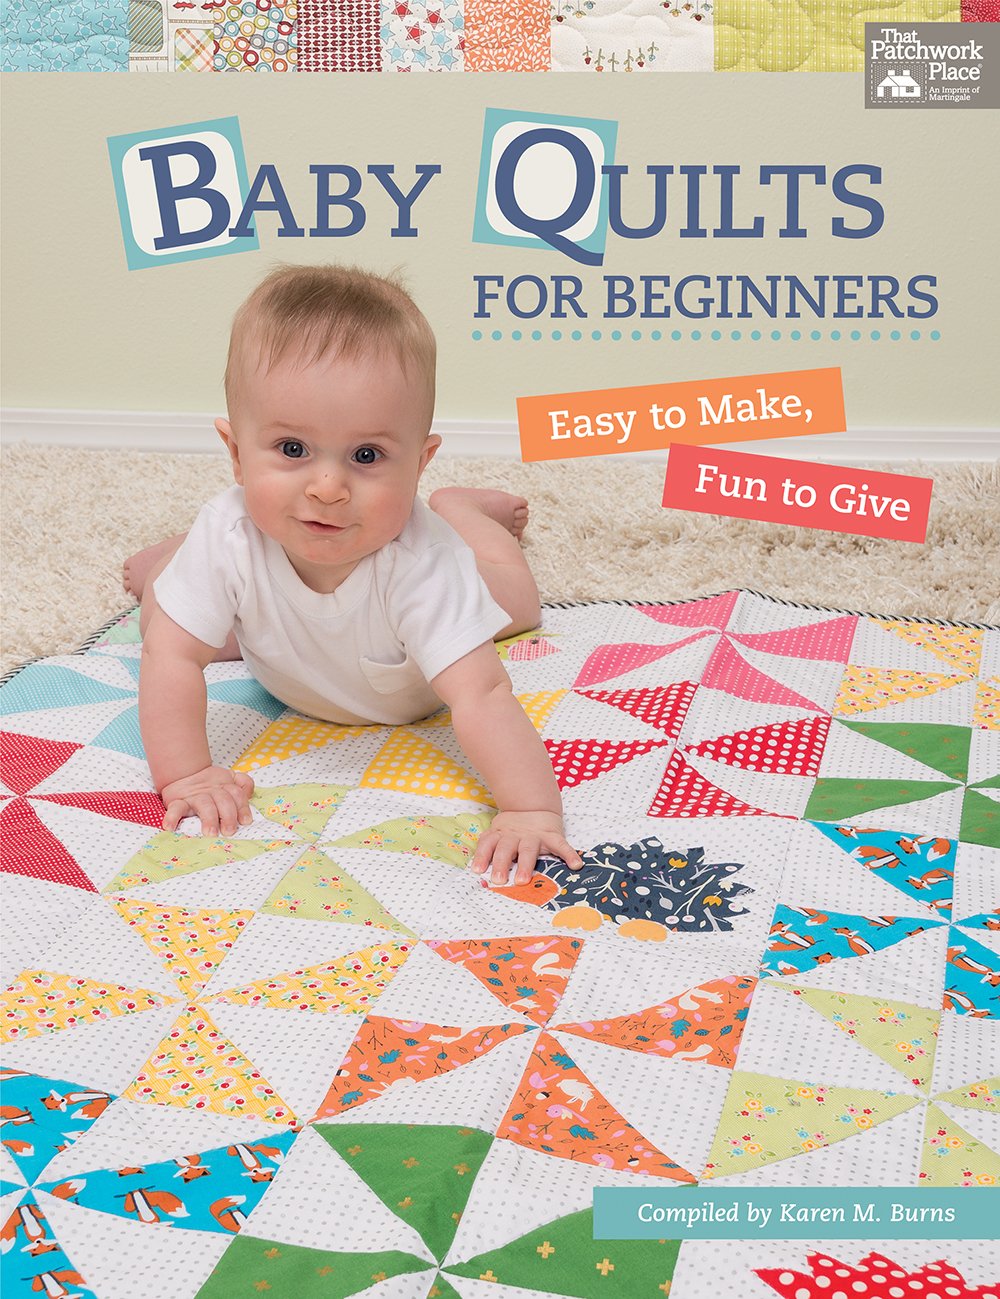 Baby Quilts for Beginners: Easy to Make, Fun to Give